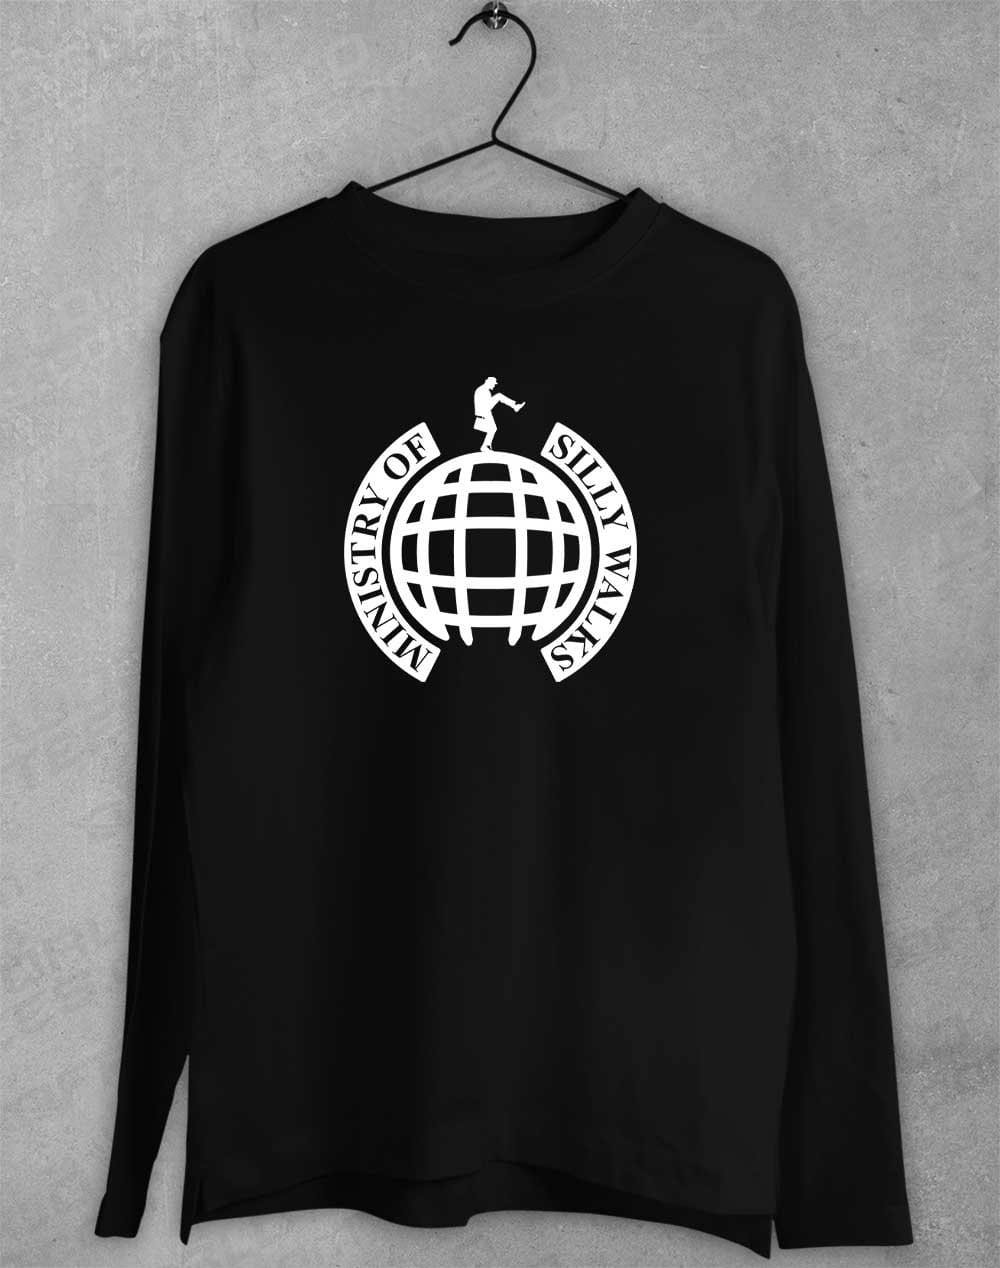 Ministry of Silly Walks Long Sleeve T-Shirt S / Black  - Off World Tees